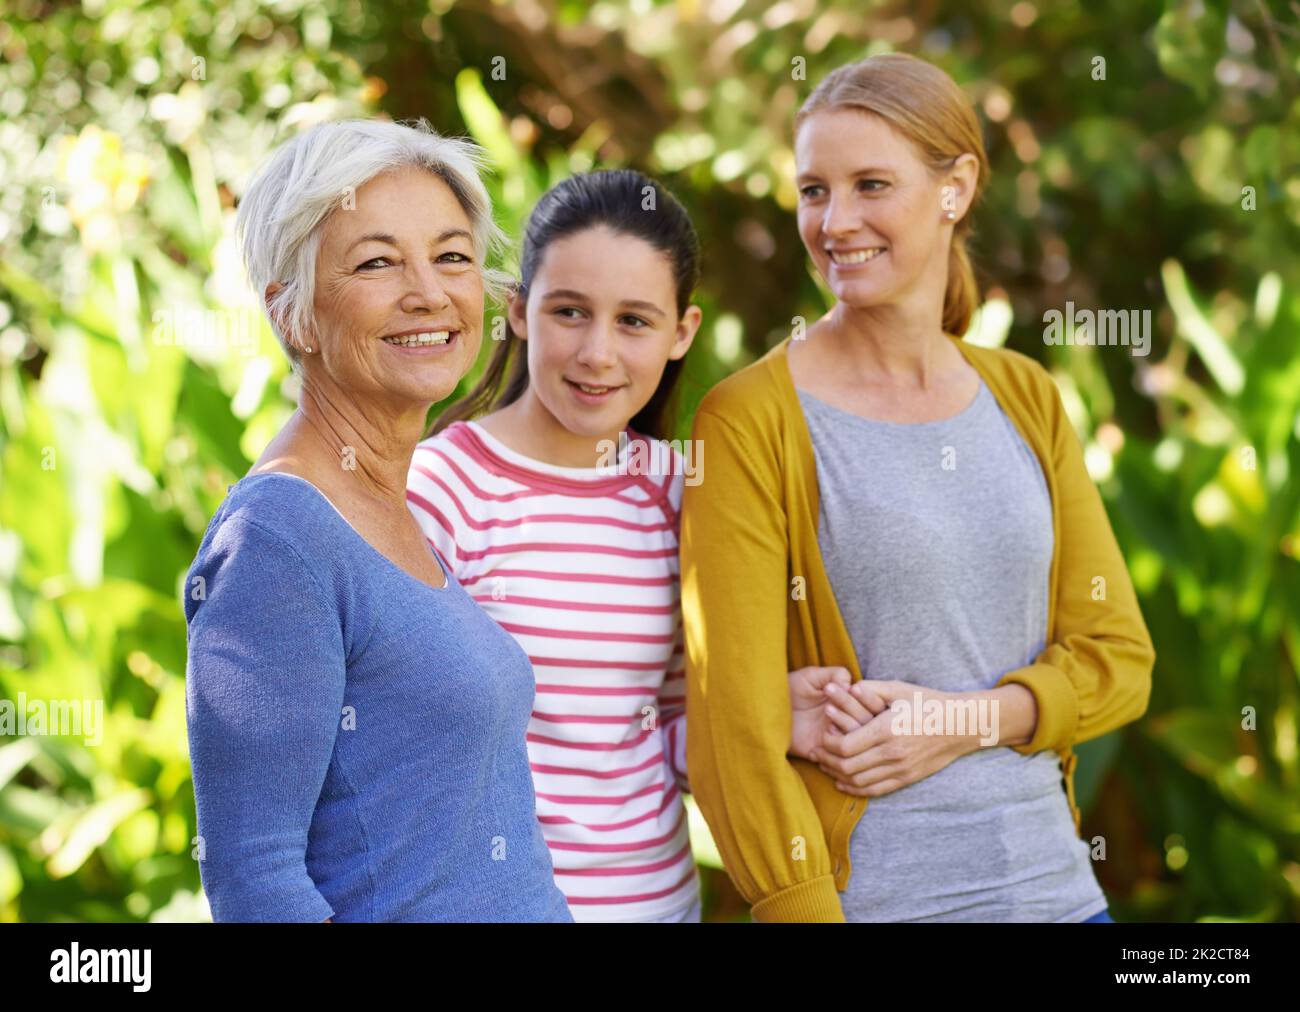 The girls are out in the park. Shot of three generations of family women standing outdoors. Stock Photo